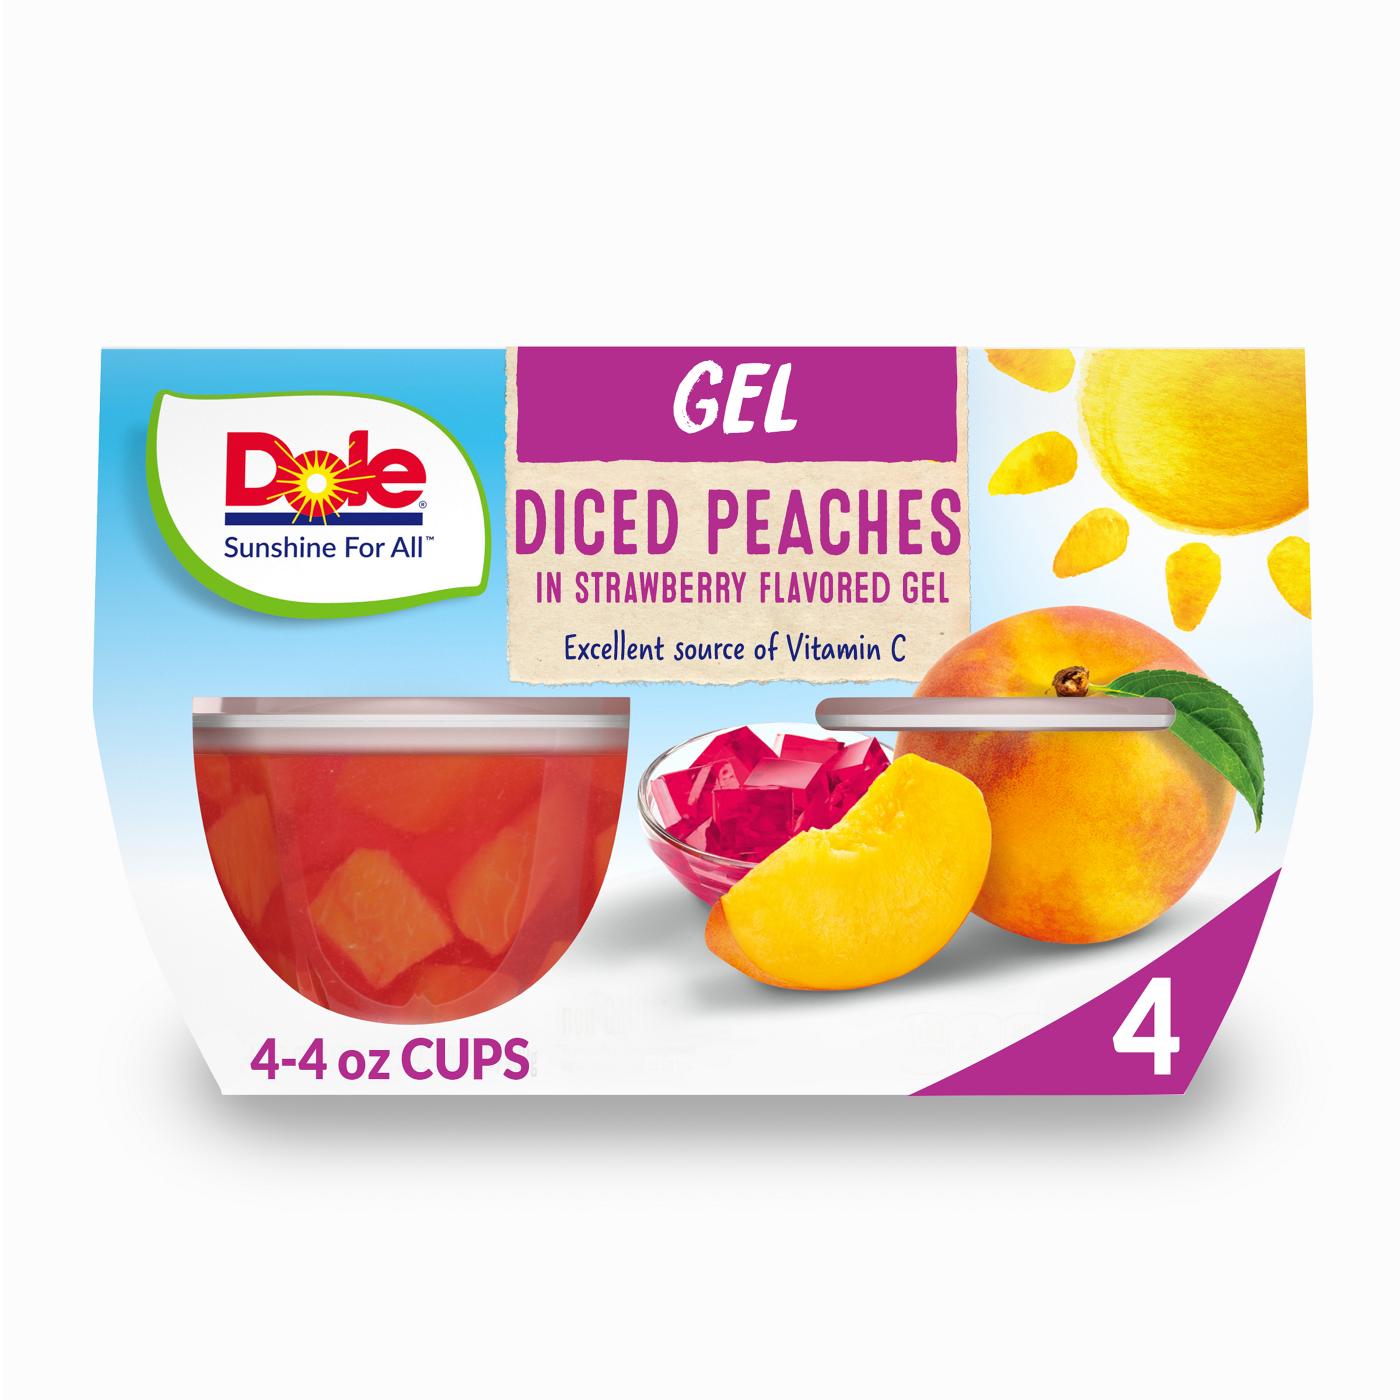 Dole Fruit Bowls - Peaches in Strawberry Flavored Gel; image 1 of 2